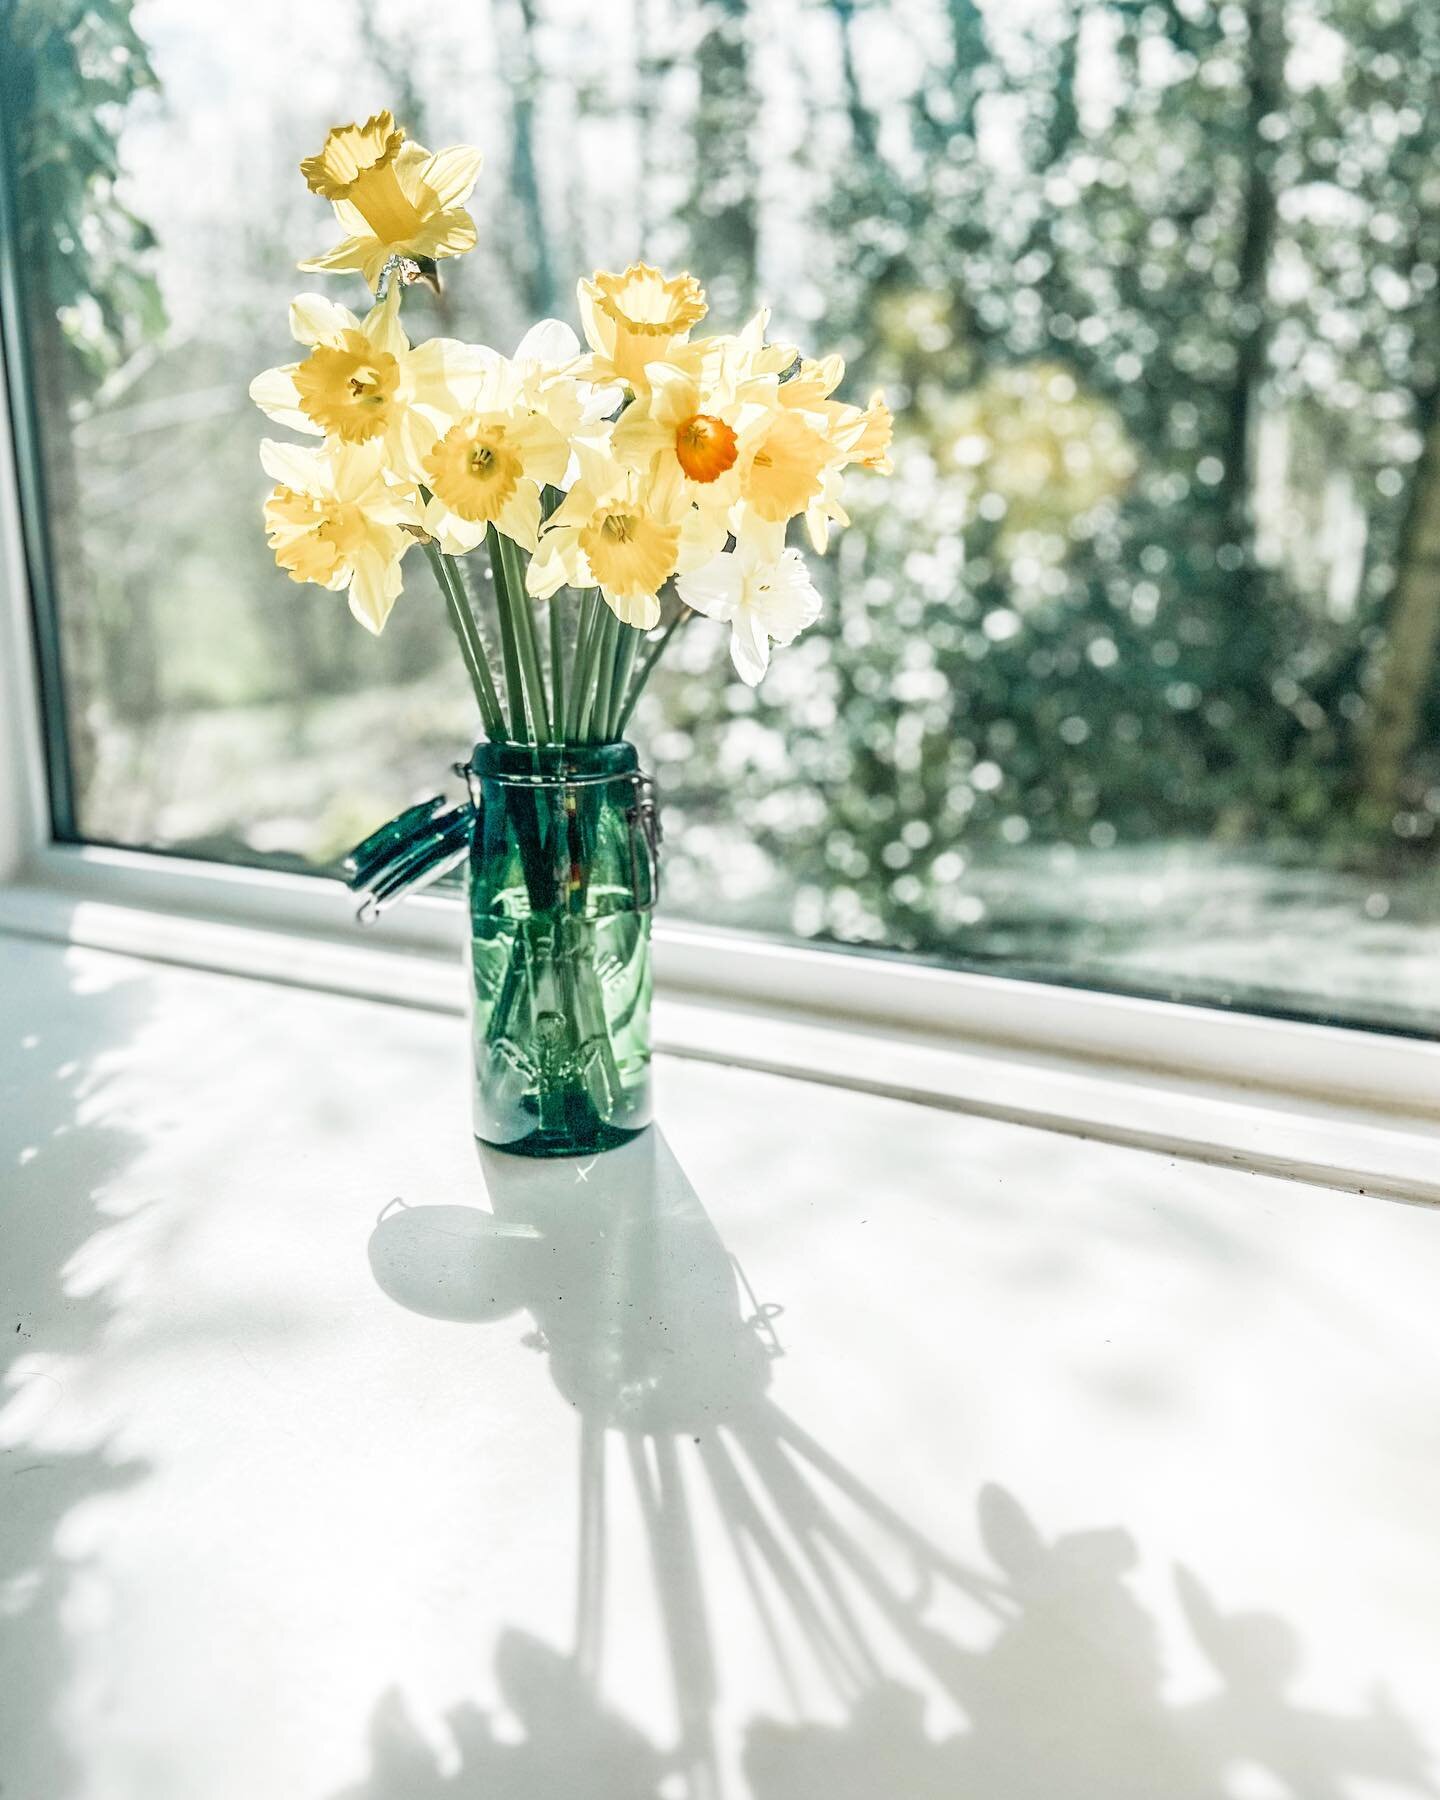 Every season has beauty! These daffodils grow wild in our woodland, and I picked some on my dog walk last night to brighten up the kitchen. This little isle I&rsquo;ve moved to is full of wonders- come explore the Cotswolds with me this summer!